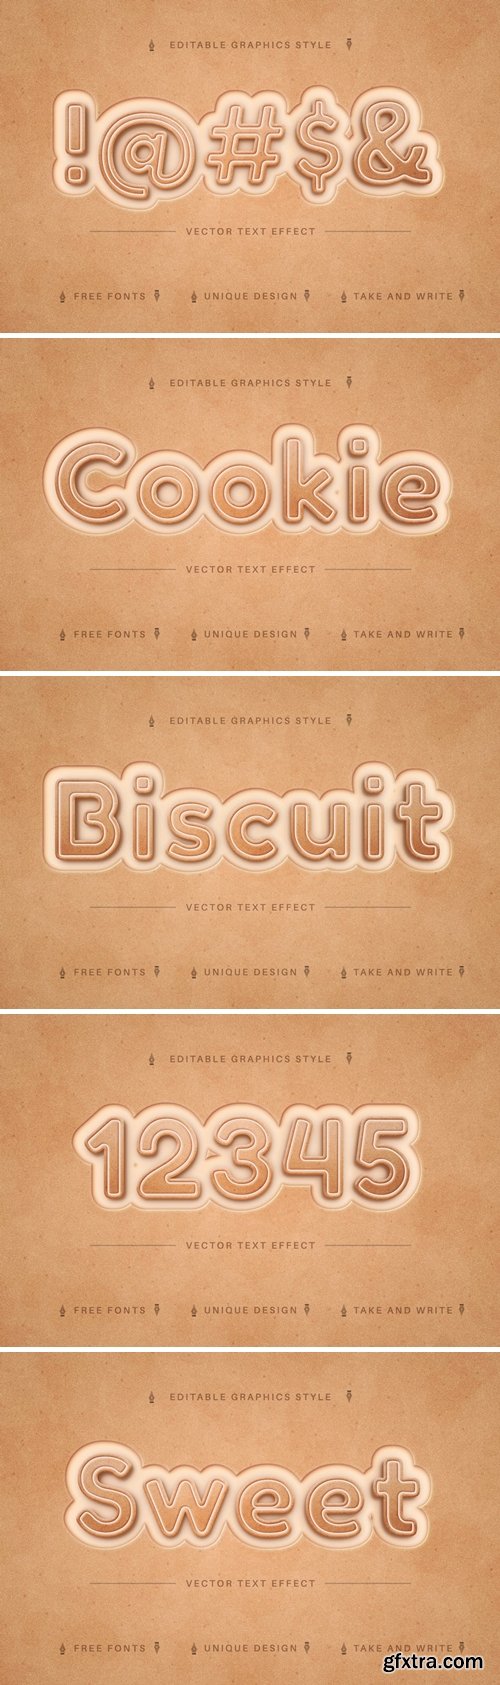 Biscuit - Edit Text Effect, Editable Font Style